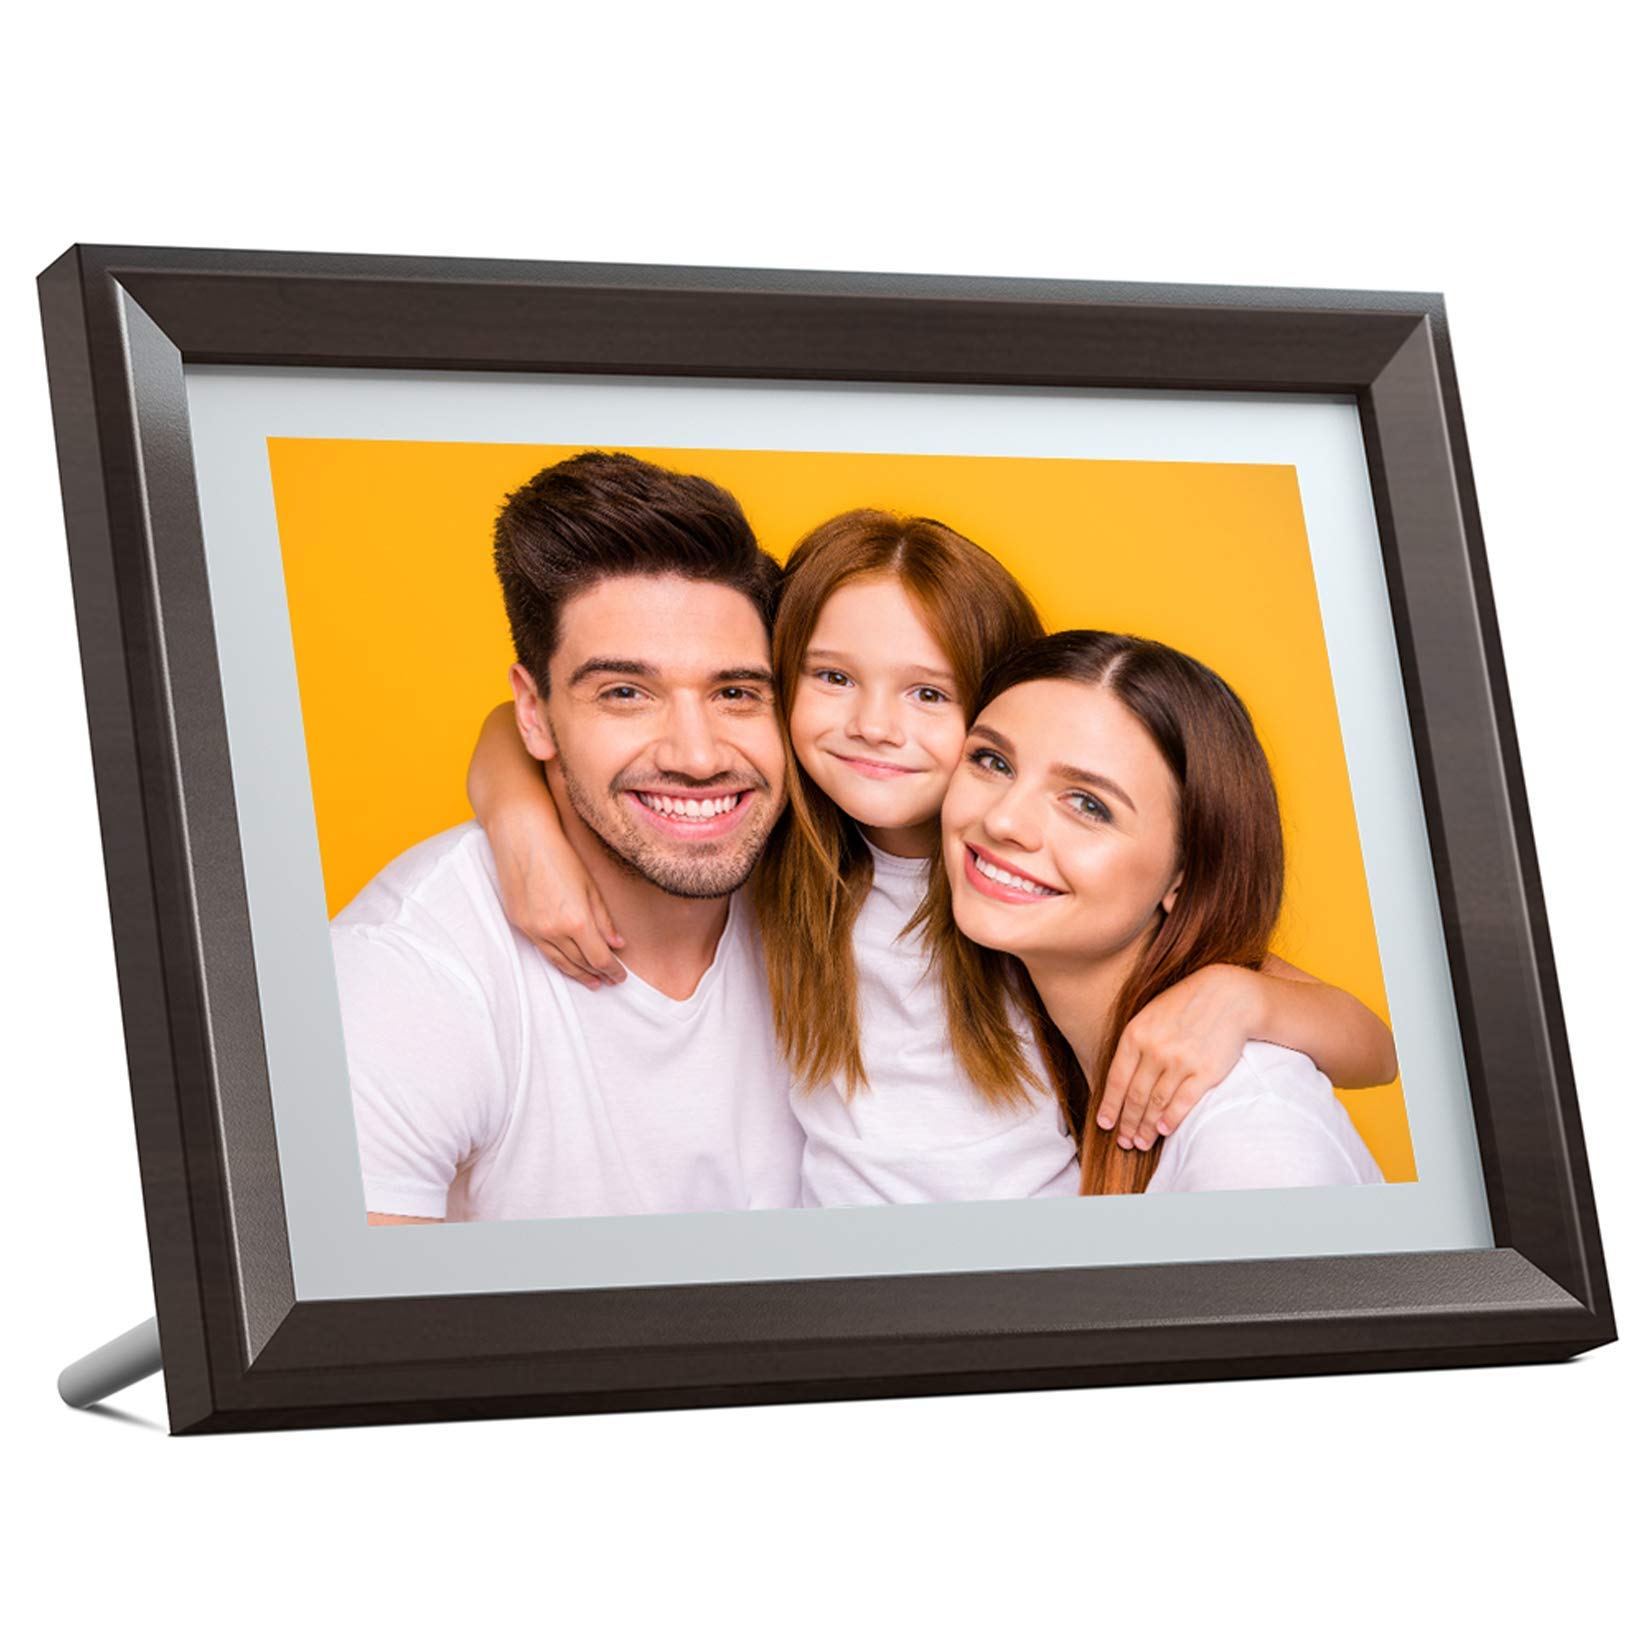 Dragon Touch Digital Picture Frame WiFi 10 inch IPS Touch Screen, 16GB Storage (7452519268590)